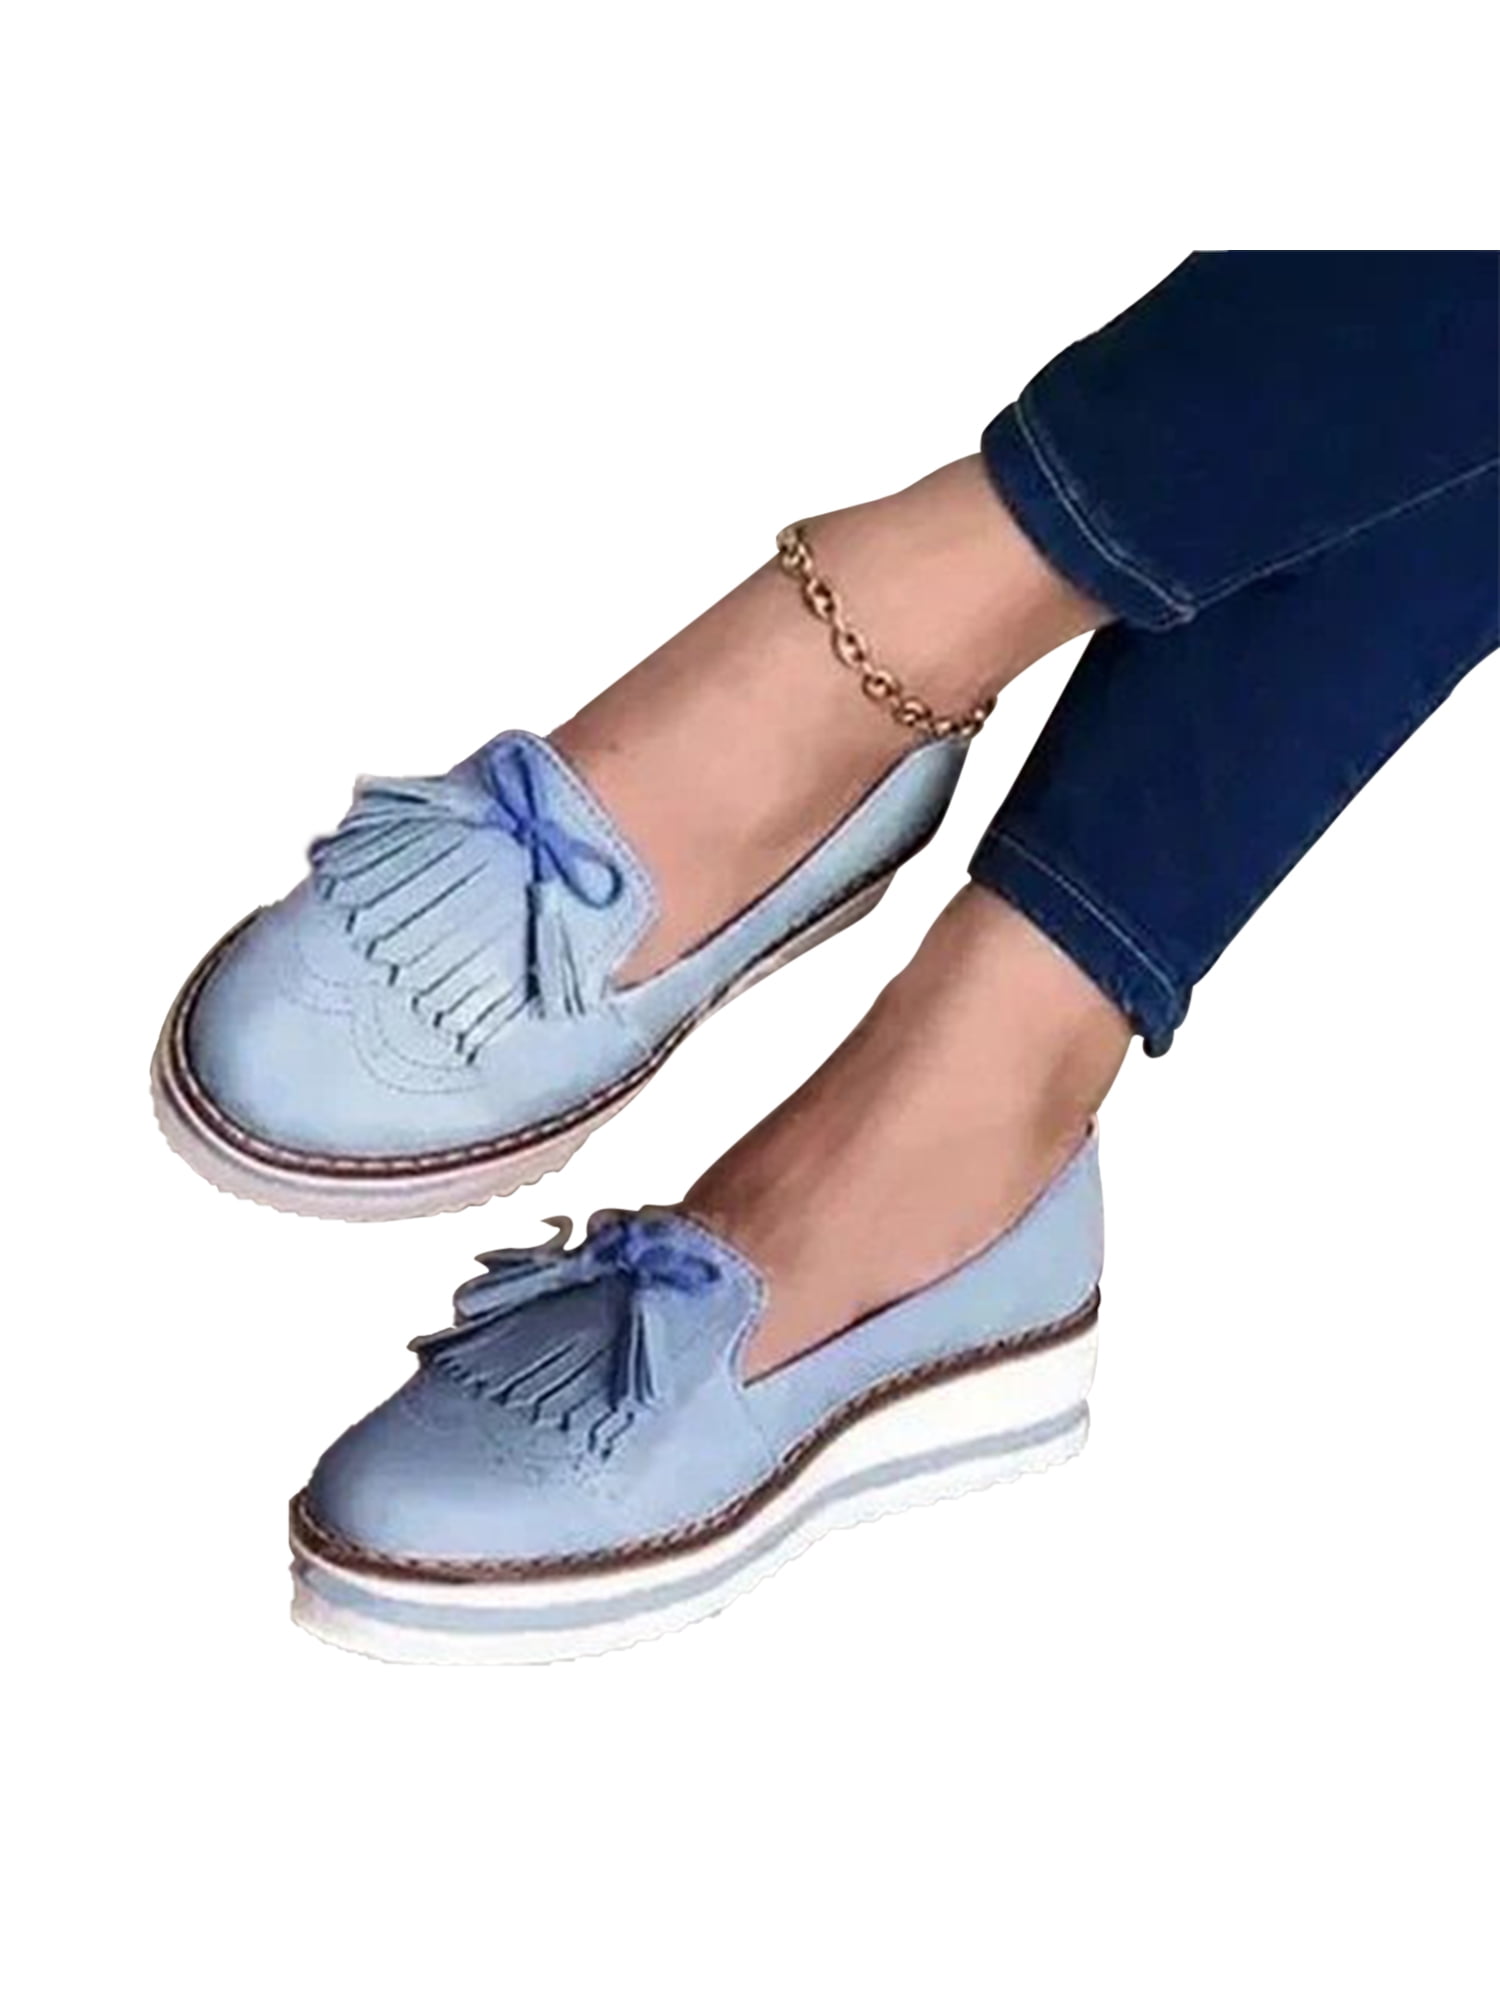 Women Platform Hidden Wedge Loafers Sneakers Slip On High Heels Hollow Out Shoes 